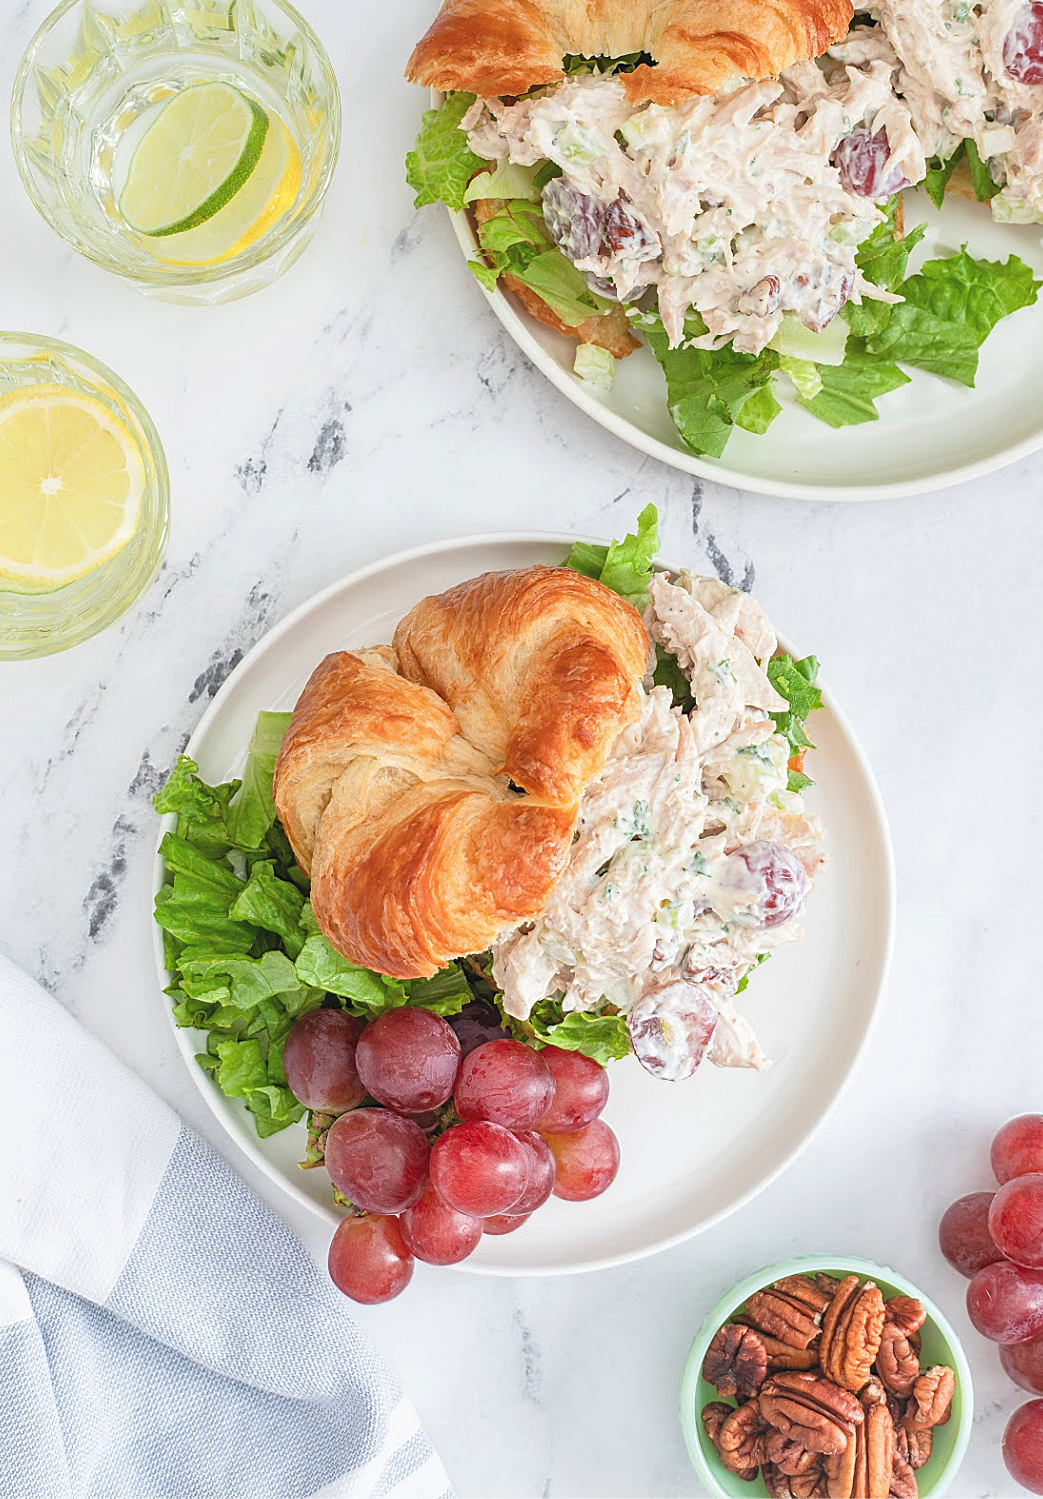 Chicken Salad with Grapes on Croissant